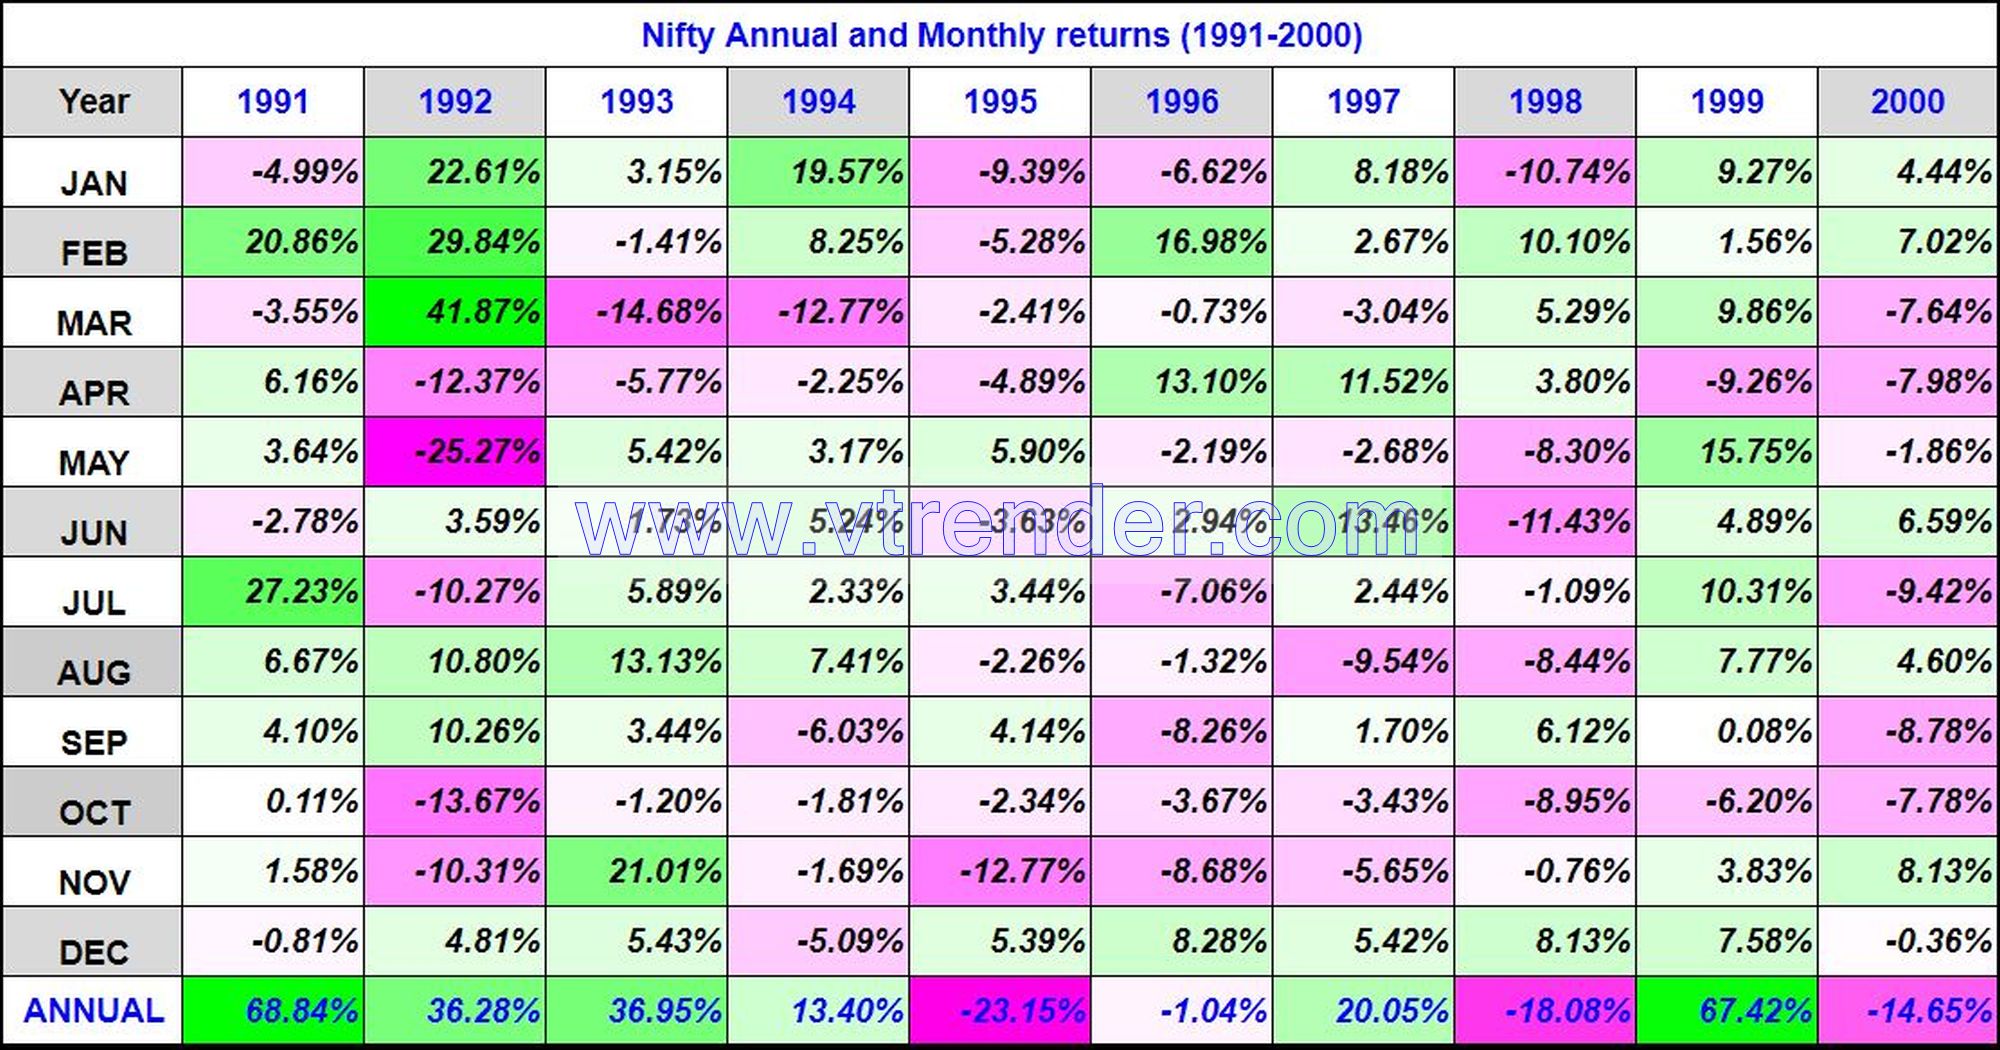 Niftyreturns1991 2000 Nifty 50 Monthly And Annual Returns (1991-2022) Updated 30Th Dec 2022 Annual, Monthly, Nifty Returns